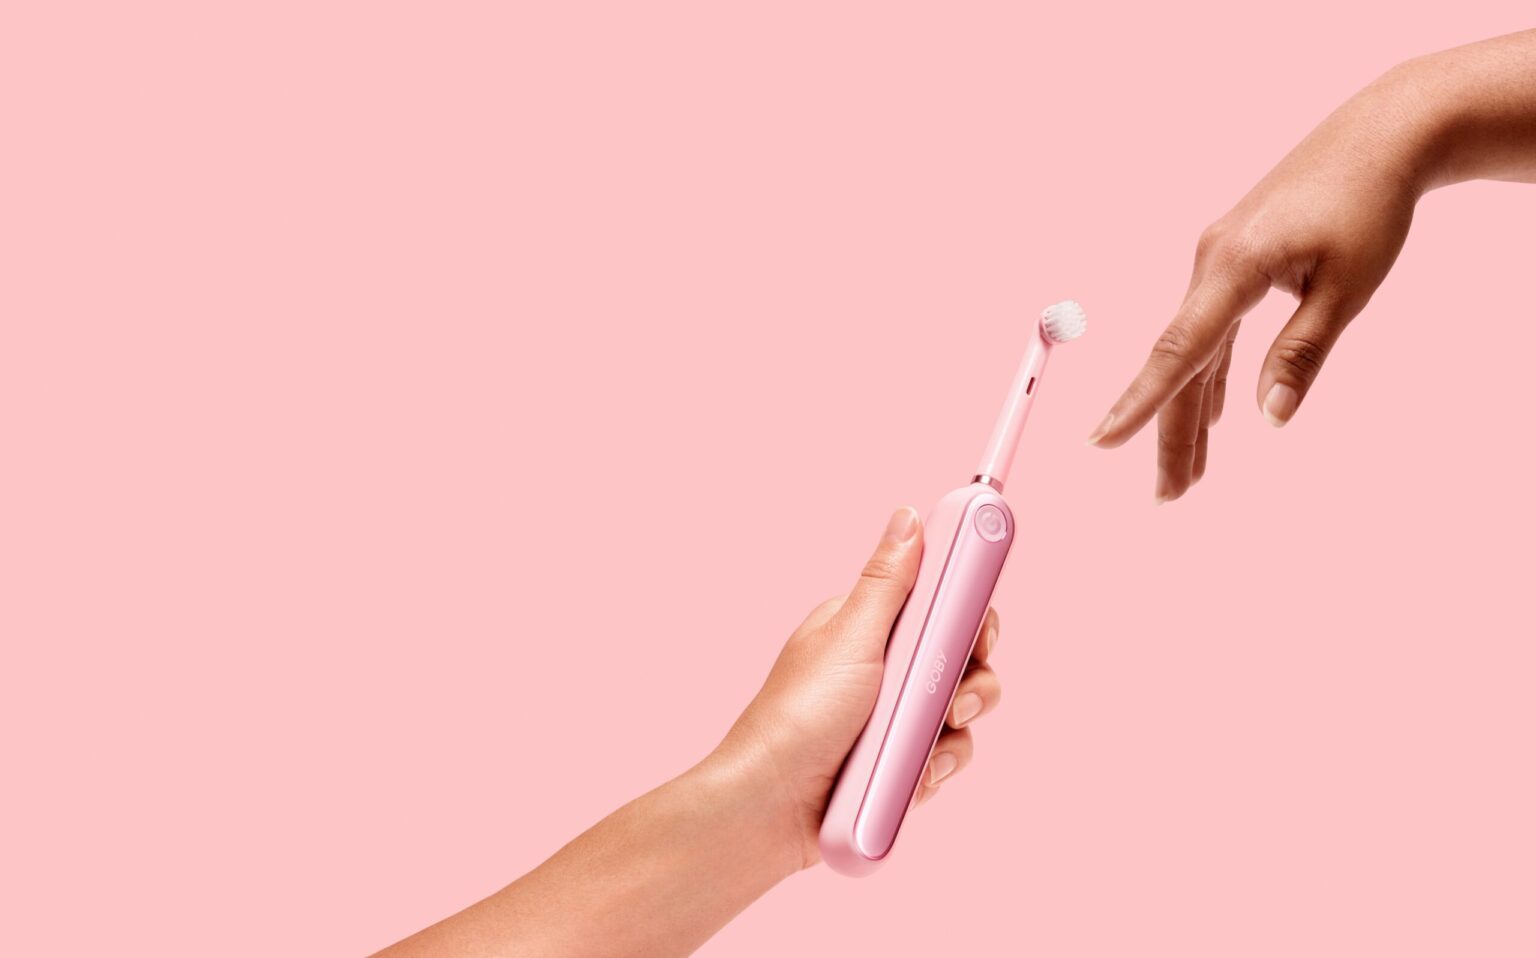 Hand holding an electric toothbrush with another hand applying toothpaste against a pink background, highlighting affordable Dallas dentistry.